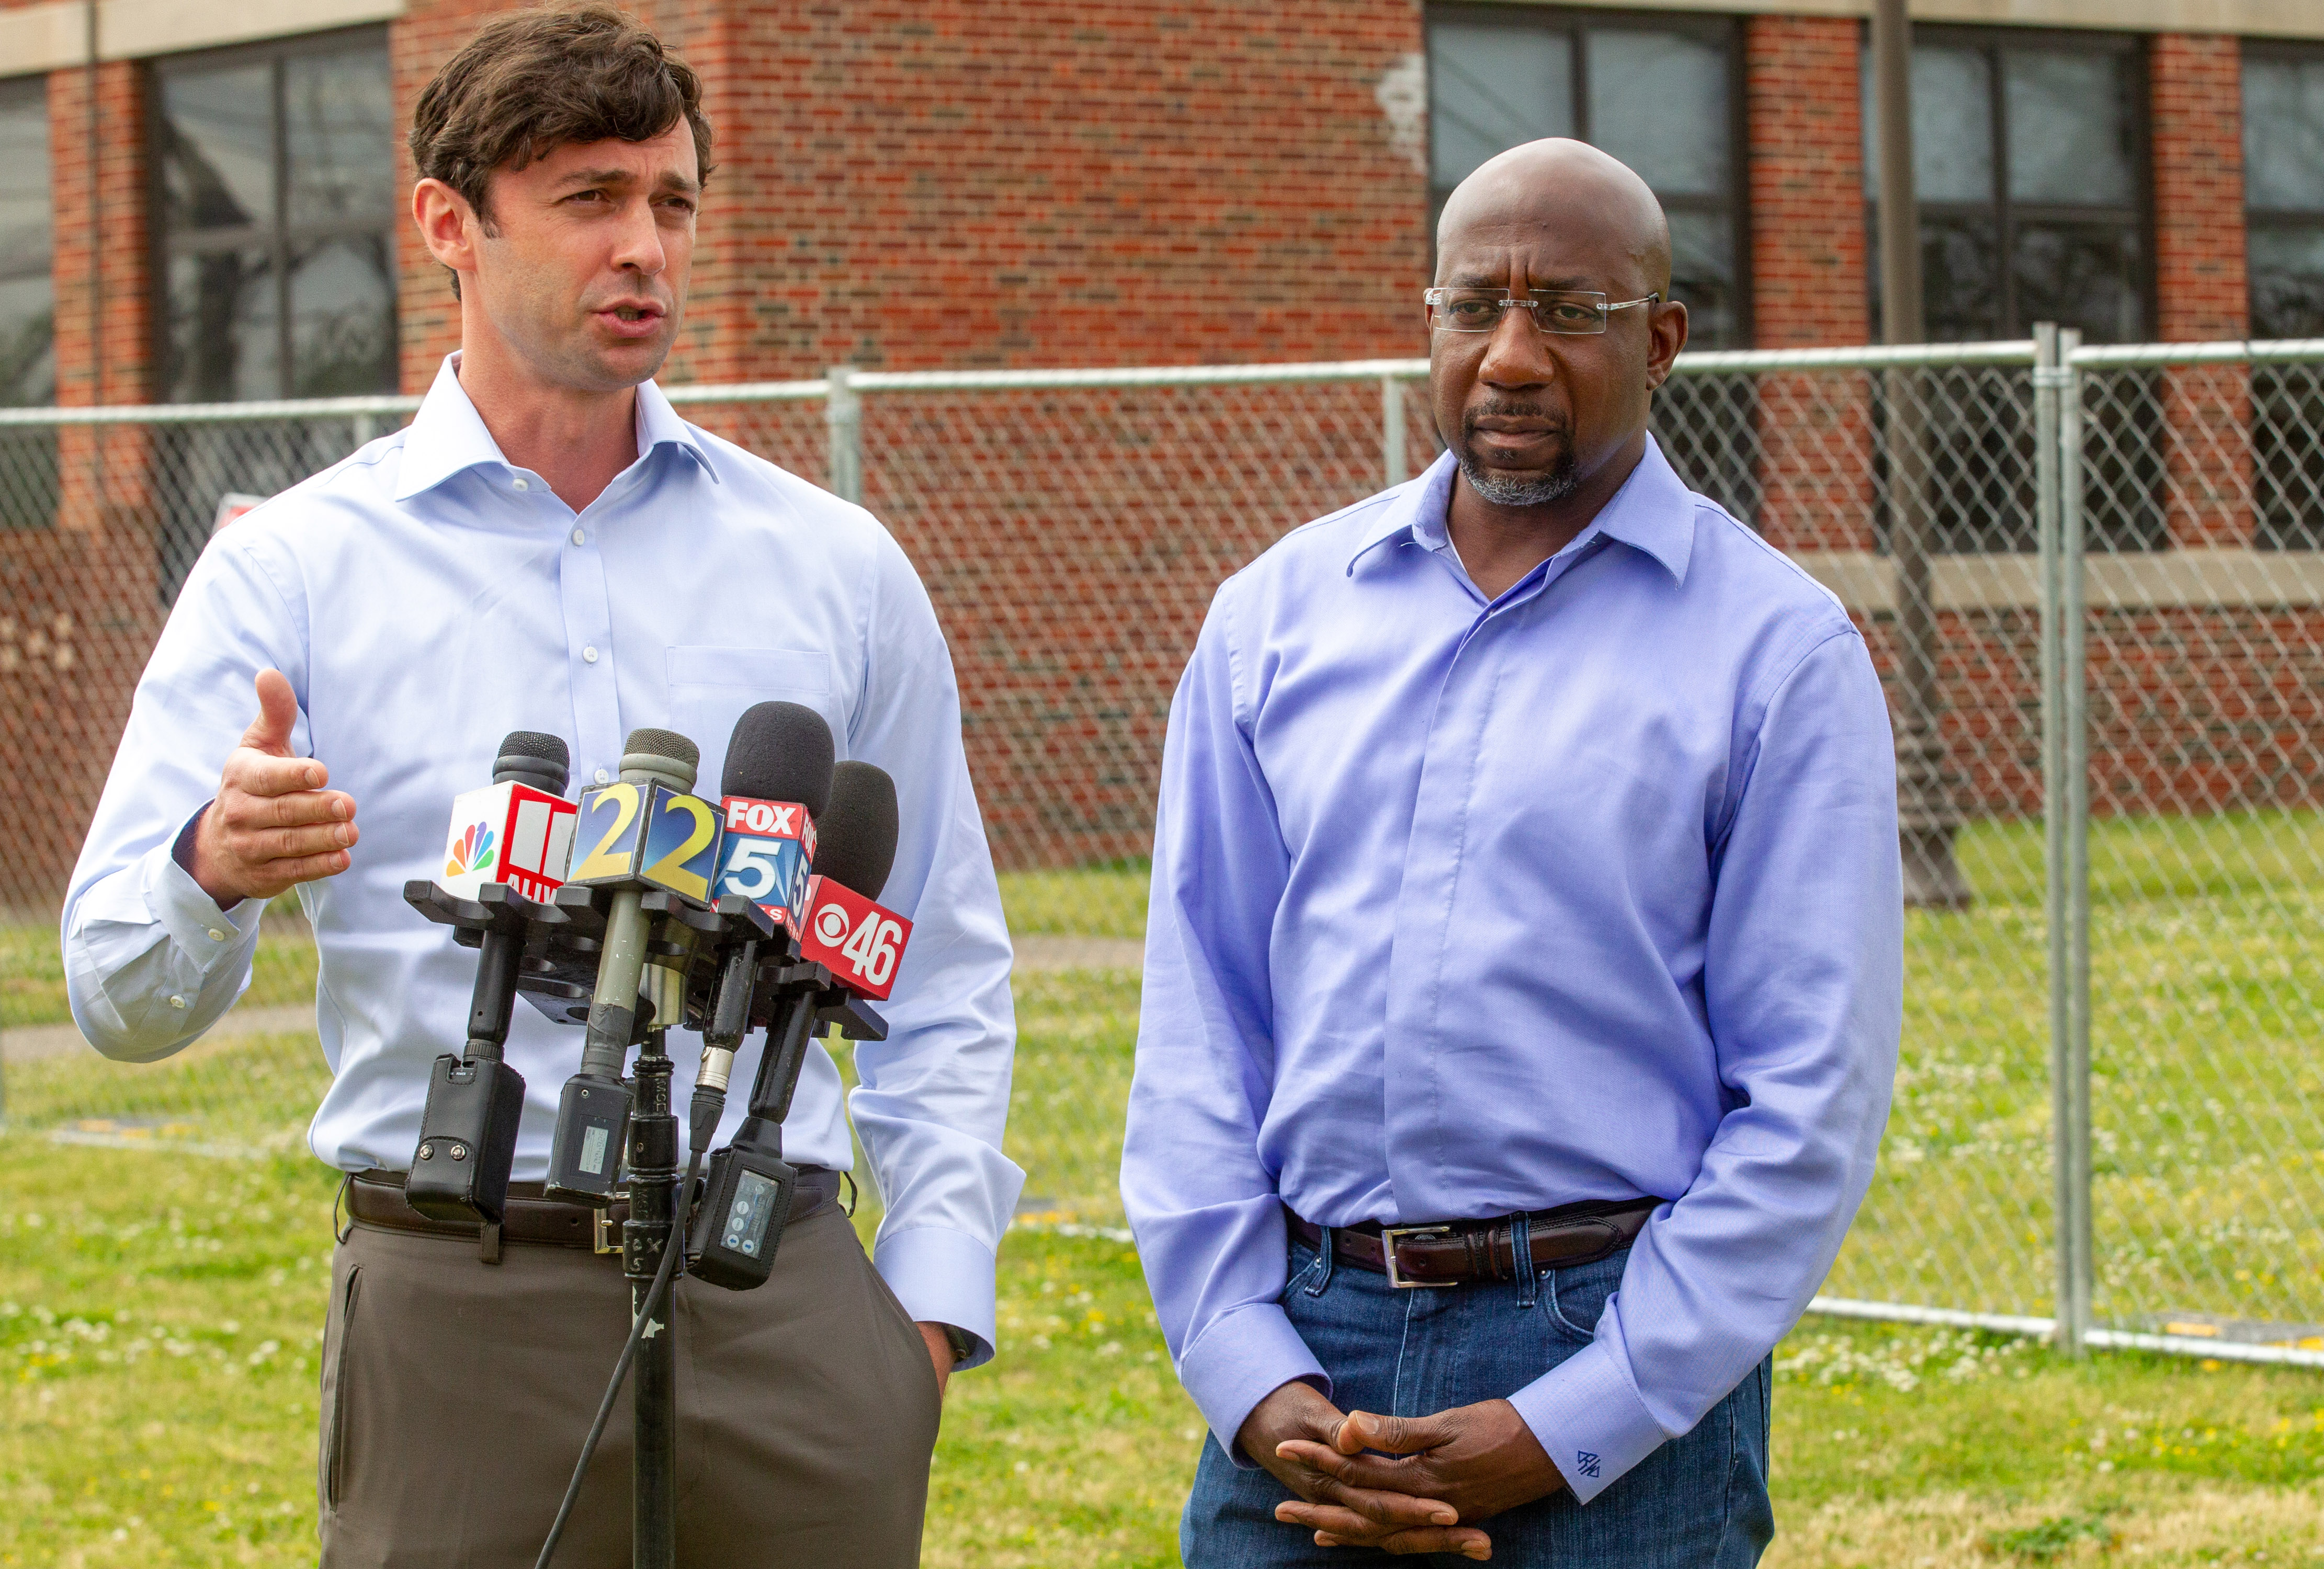 Georgia U.S. Sens. Jon Ossoff (left) and Raphael Warnock say they will honor the request by U.S. Sen. Chris Murphy, D-Connecticut, to wait patiently while talks continue on a bipartisan effort to produce gun control legislation. Warnock said Democrats won't get everything they want, but it's important that something gets done following last month's mass shooting at a Uvalde, Texas, elementary school that killed 19 children and two teachers. (Photo: Steve Schaefer for The Atlanta Journal-Constitution)